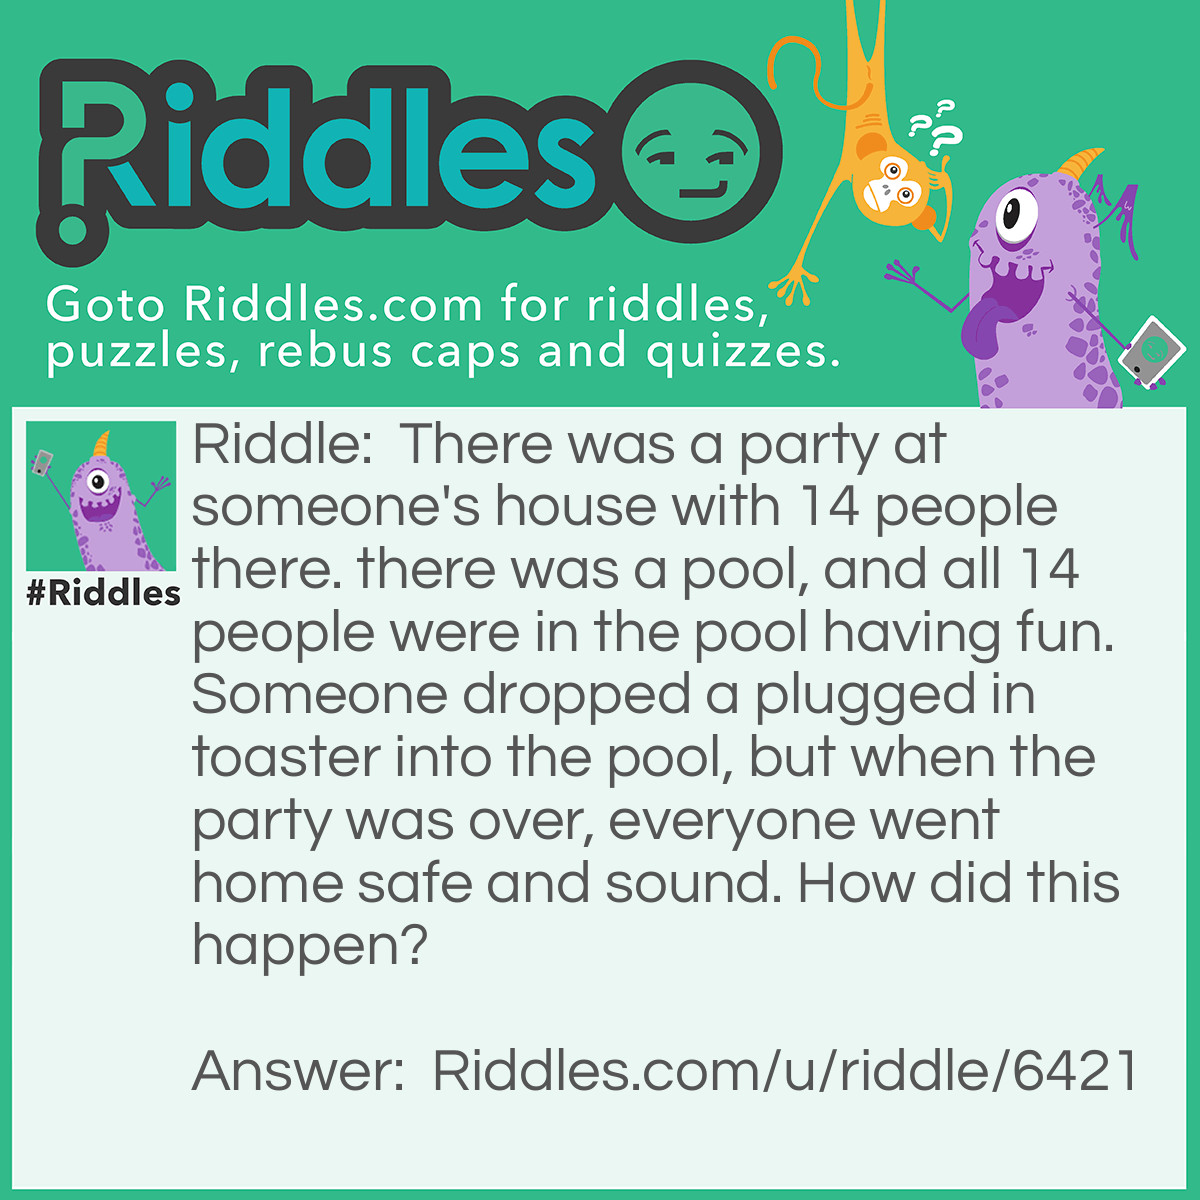 Riddle: There was a party at someone's house with 14 people there. there was a pool, and all 14 people were in the pool having fun. Someone dropped a plugged in toaster into the pool, but when the party was over, everyone went home safe and sound. How did this happen? Answer: There was no water in the pool.